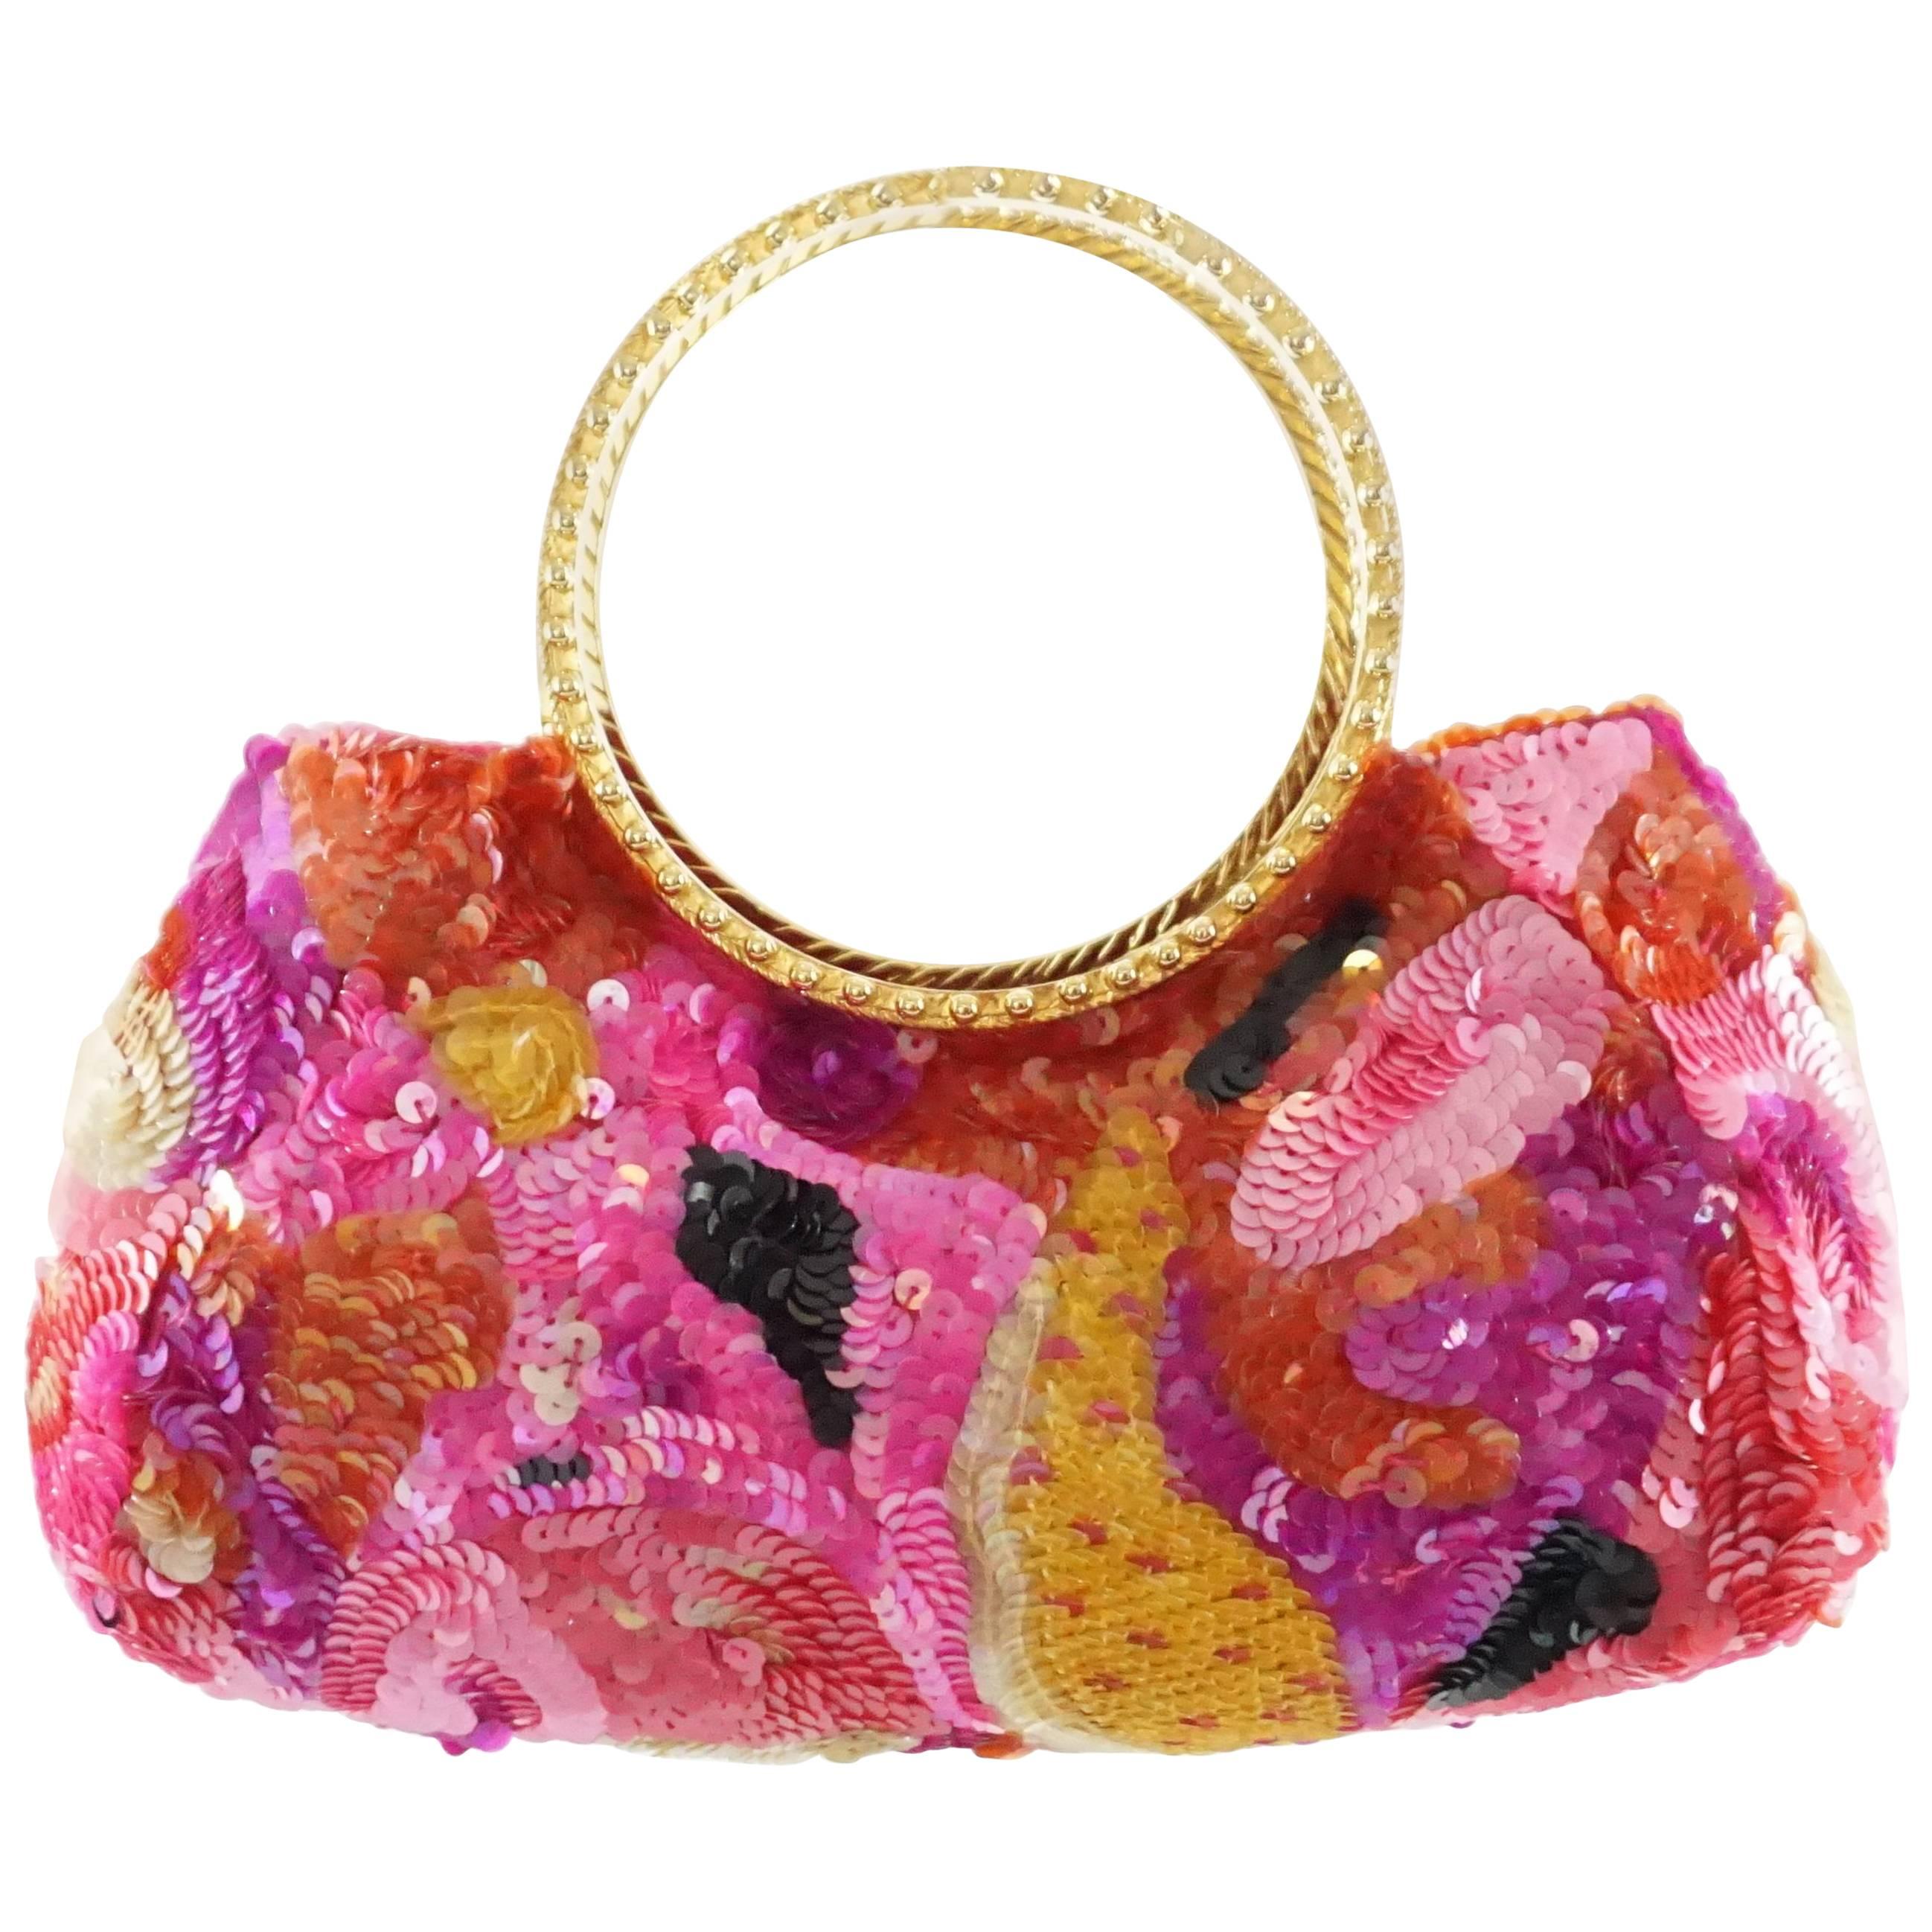 Badgley Mischka Pink and Red Sequin Evening Bag with Gold Handles